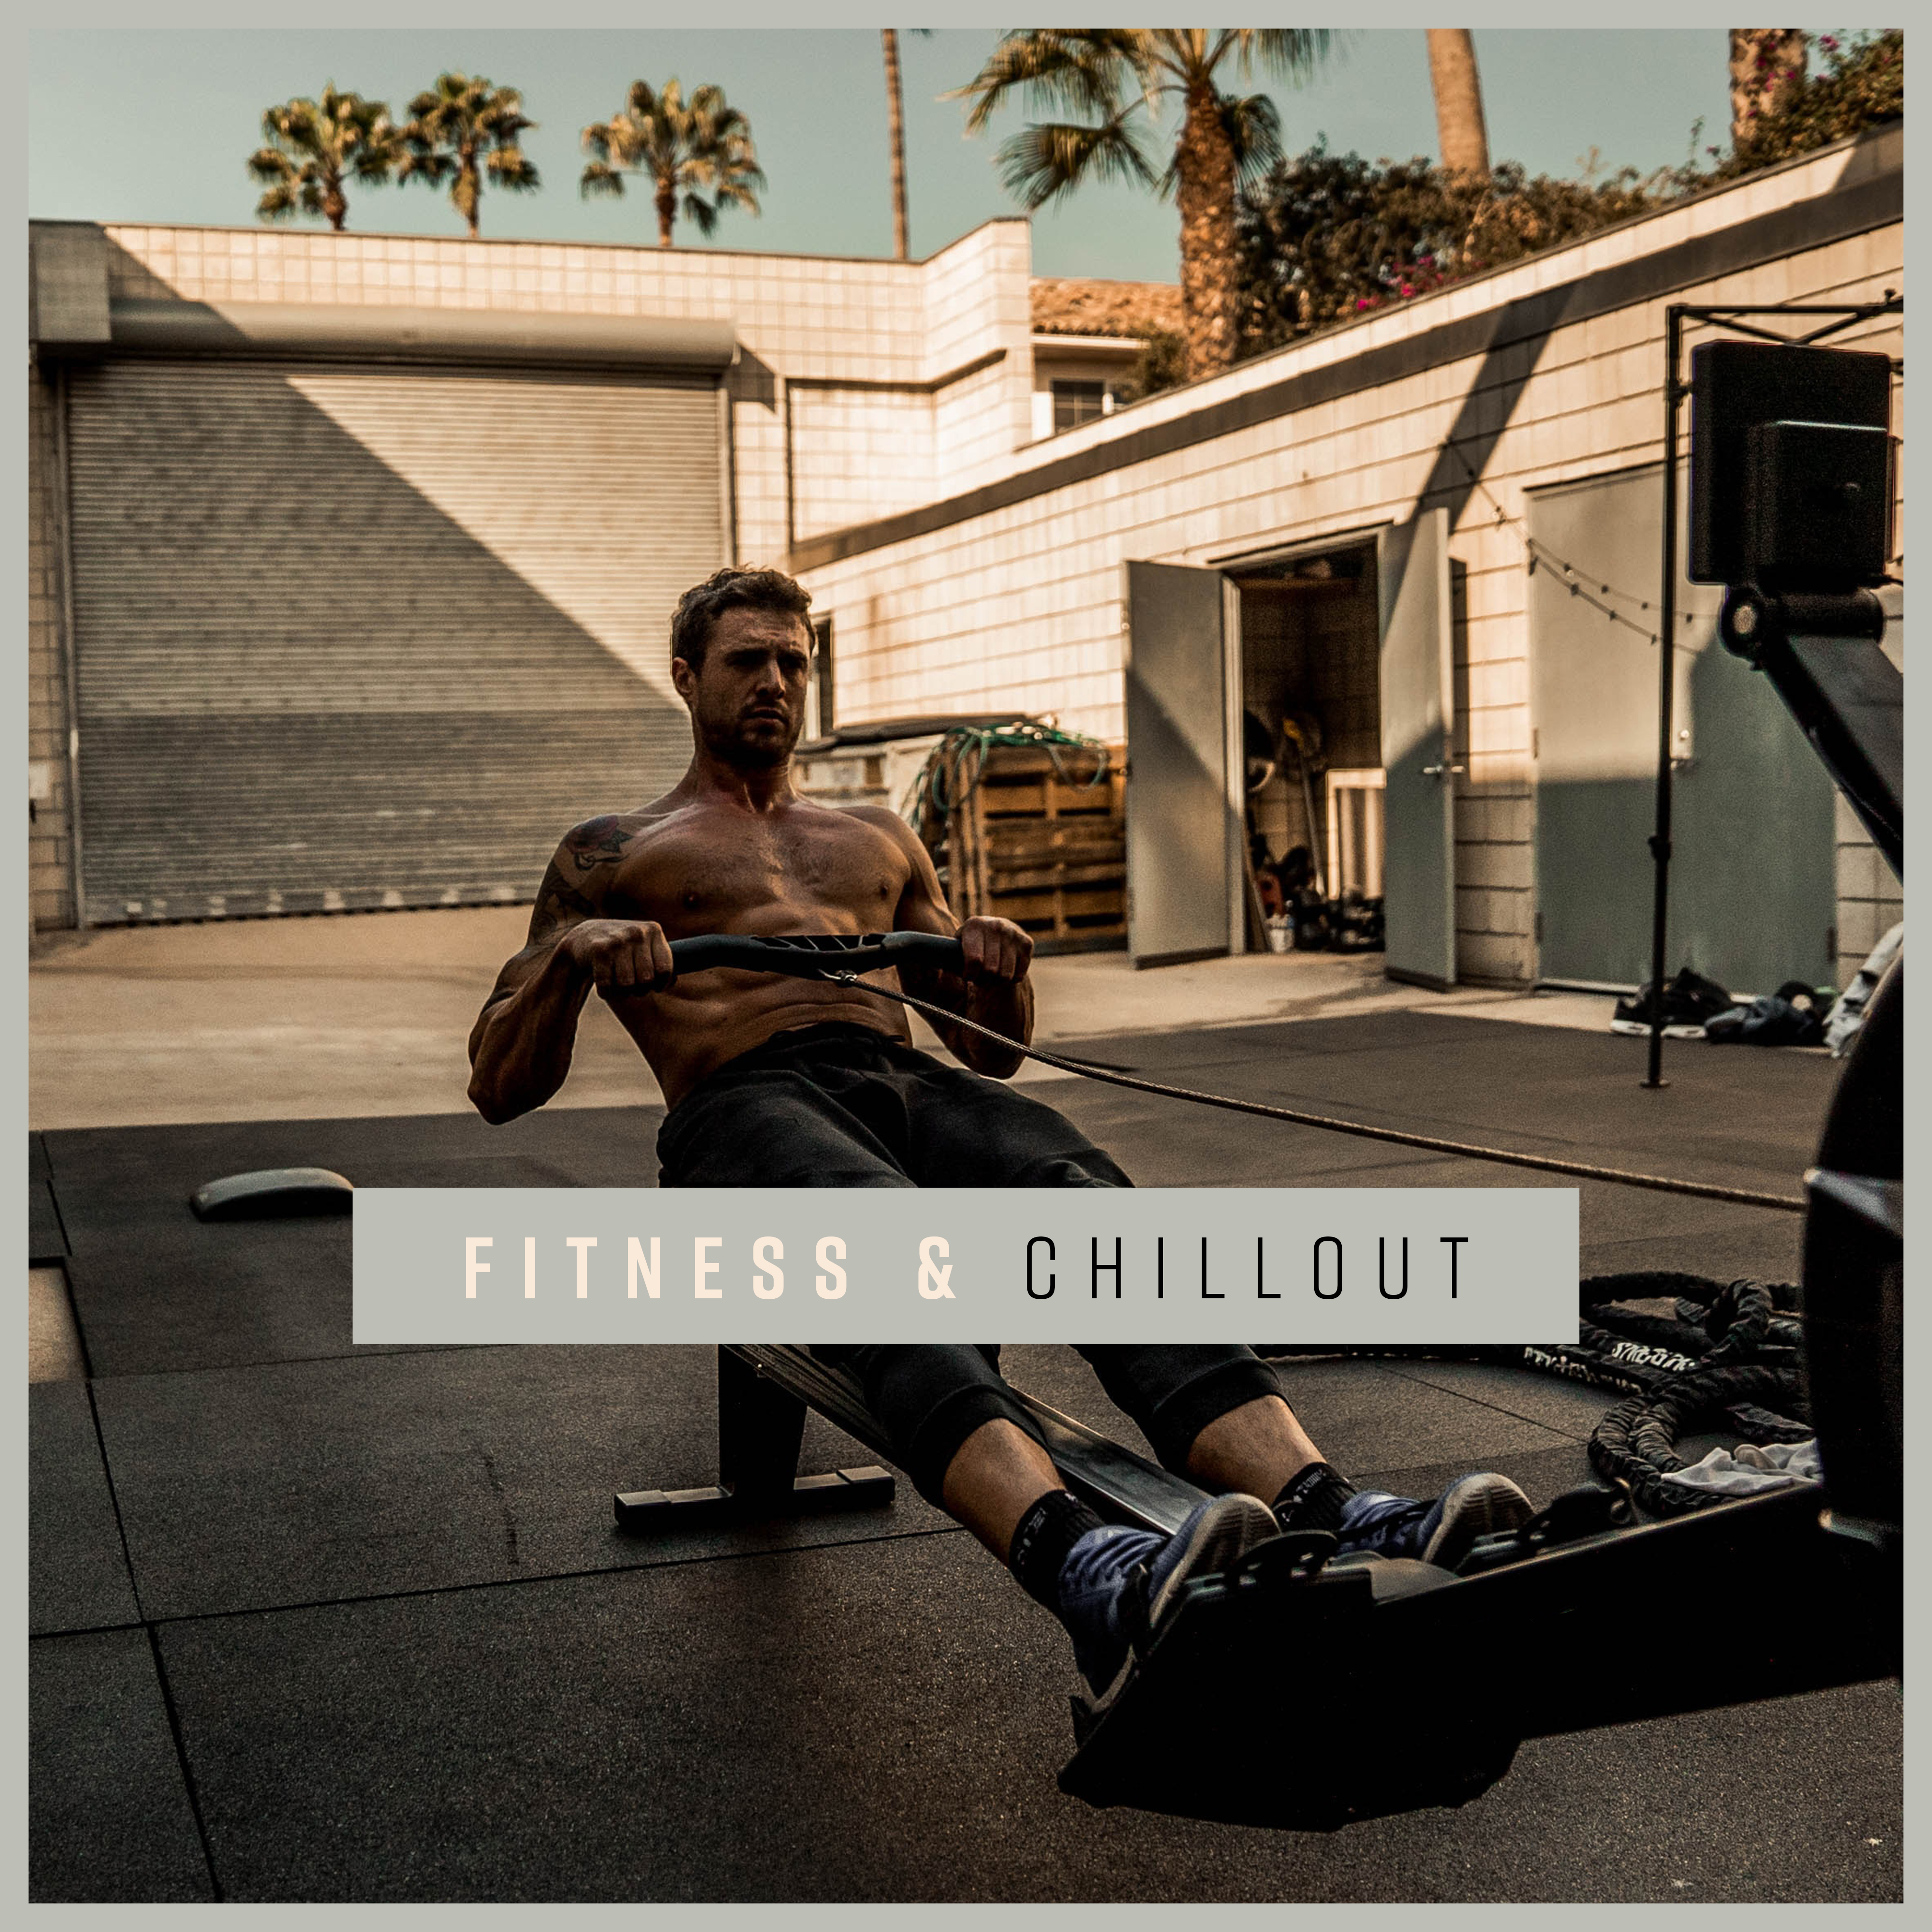 Fitness & Chillout